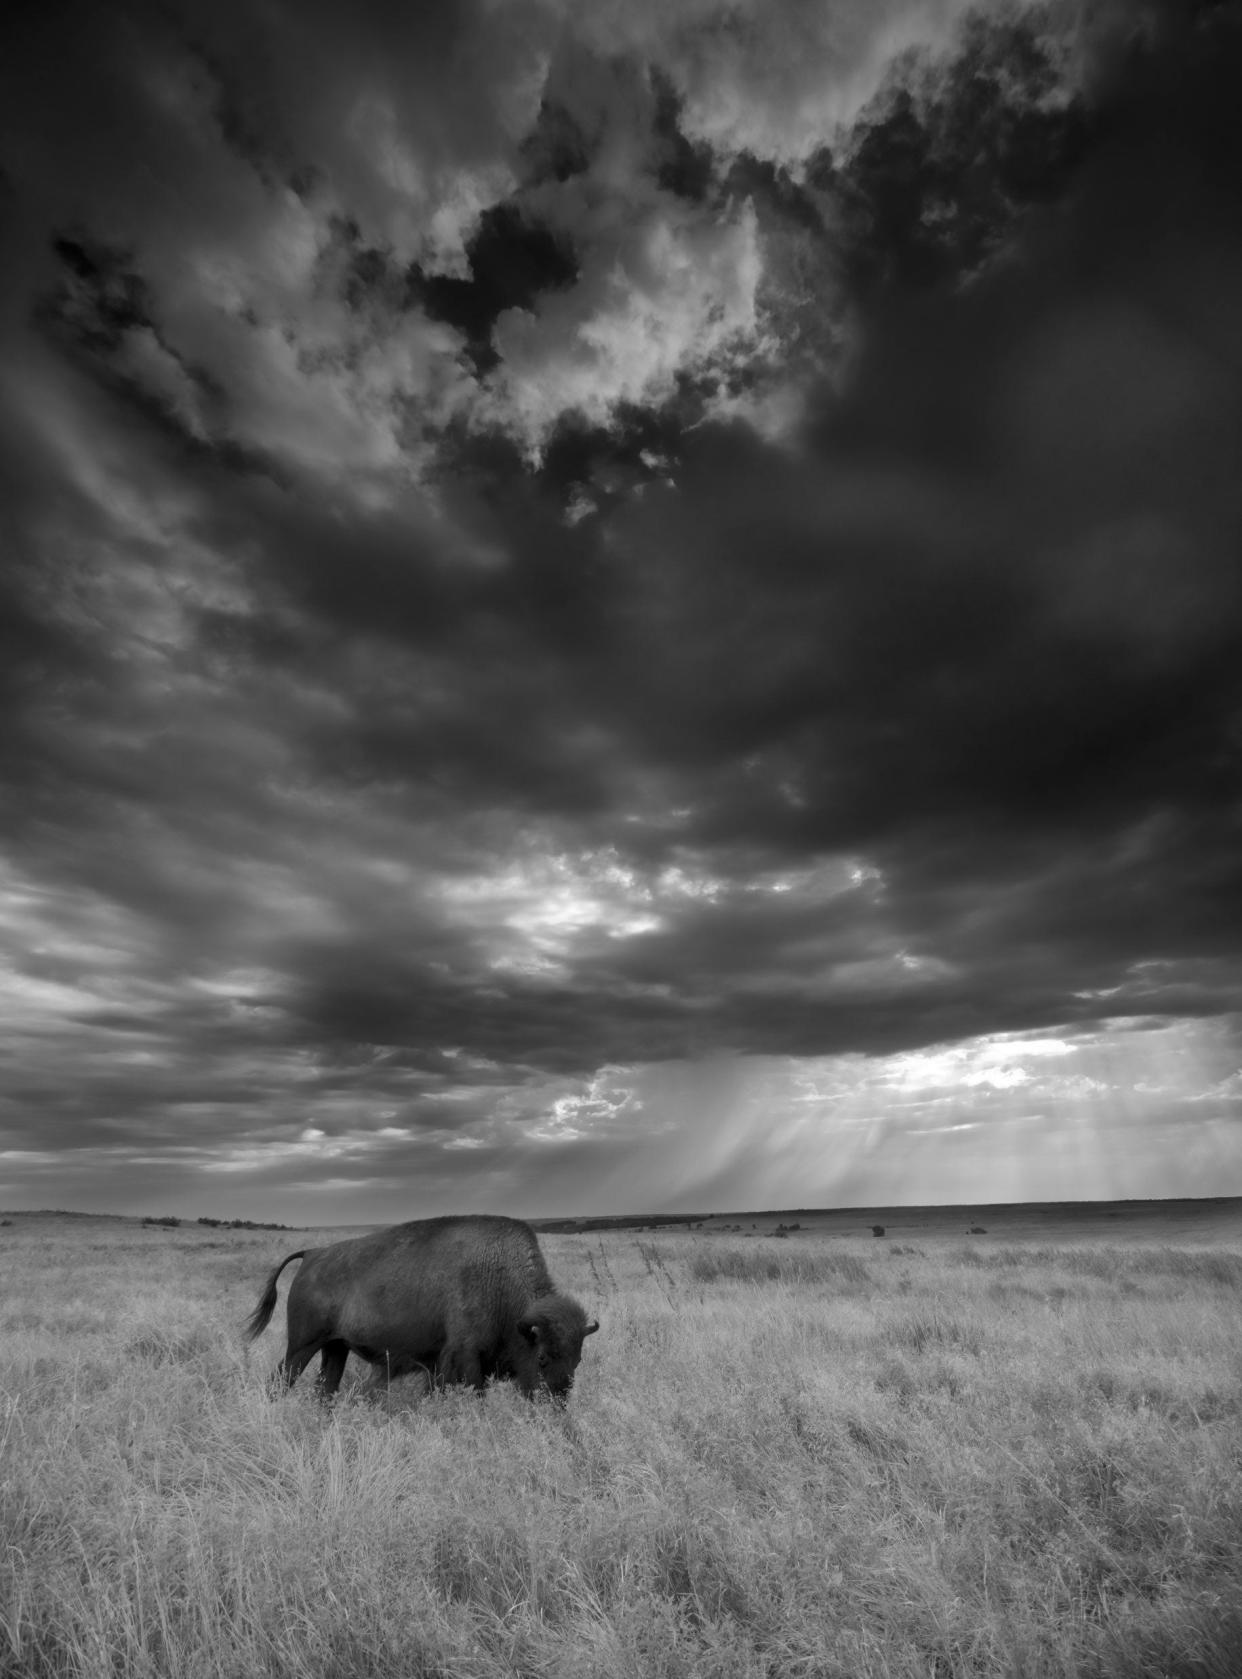 This dramatic black and white image of a bison was photographed by Mike Fuhr, state director of The Nature Conservancy – Oklahoma Chapter. The bison was grazing on the Conservancy's Tallgrass Prairie Preserve in Osage County.